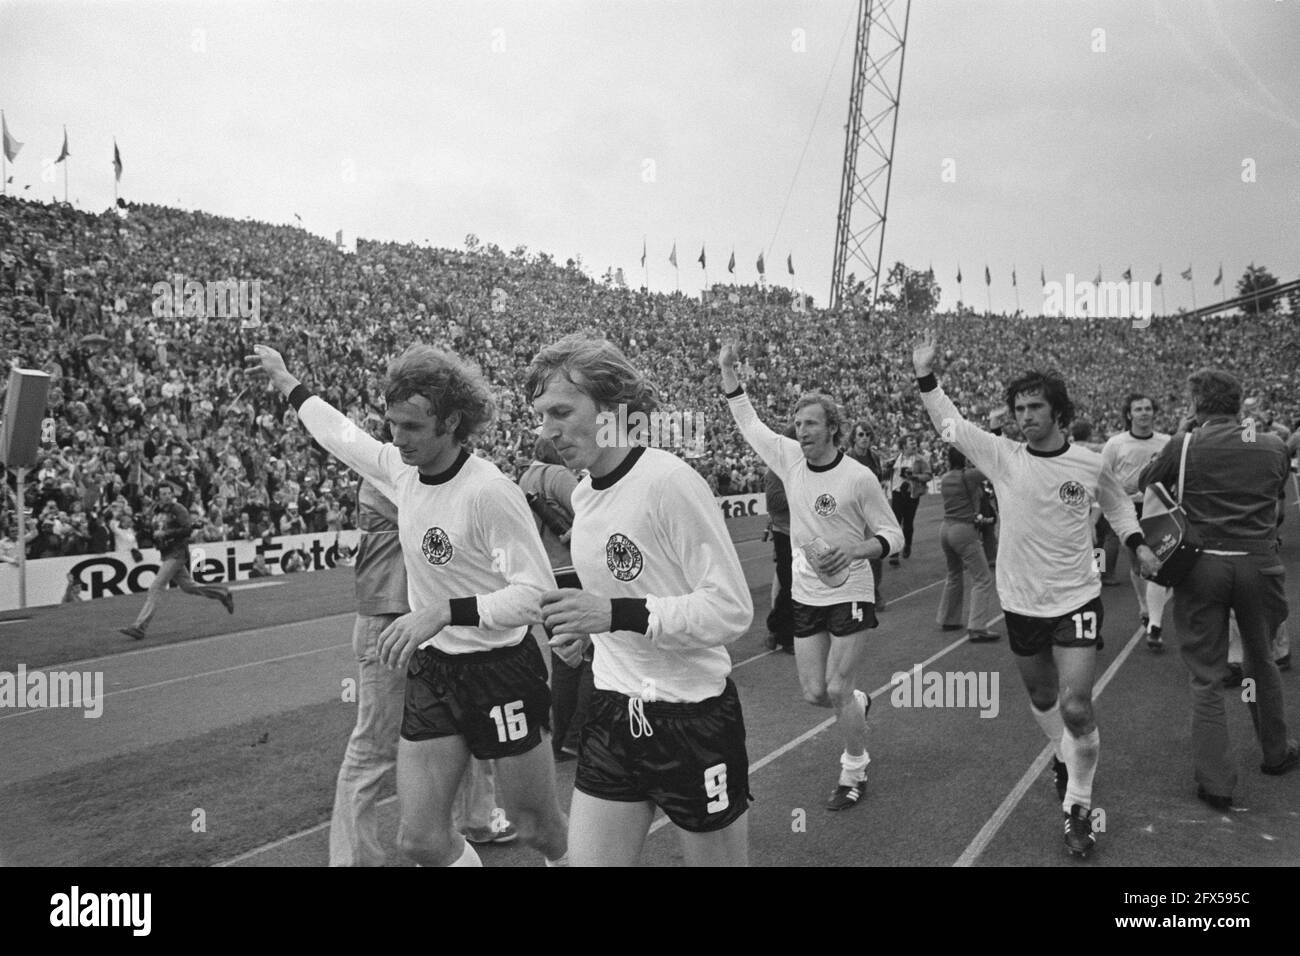 Finals World Cup 1974 in Munich, West Germany v Netherlands 2-1; German players with the World Cup, July 7, 1974, finals, sports, soccer, world championships, The Netherlands, 20th century press agency photo, news to remember, documentary, historic photography 1945-1990, visual stories, human history of the Twentieth Century, capturing moments in time Stock Photo